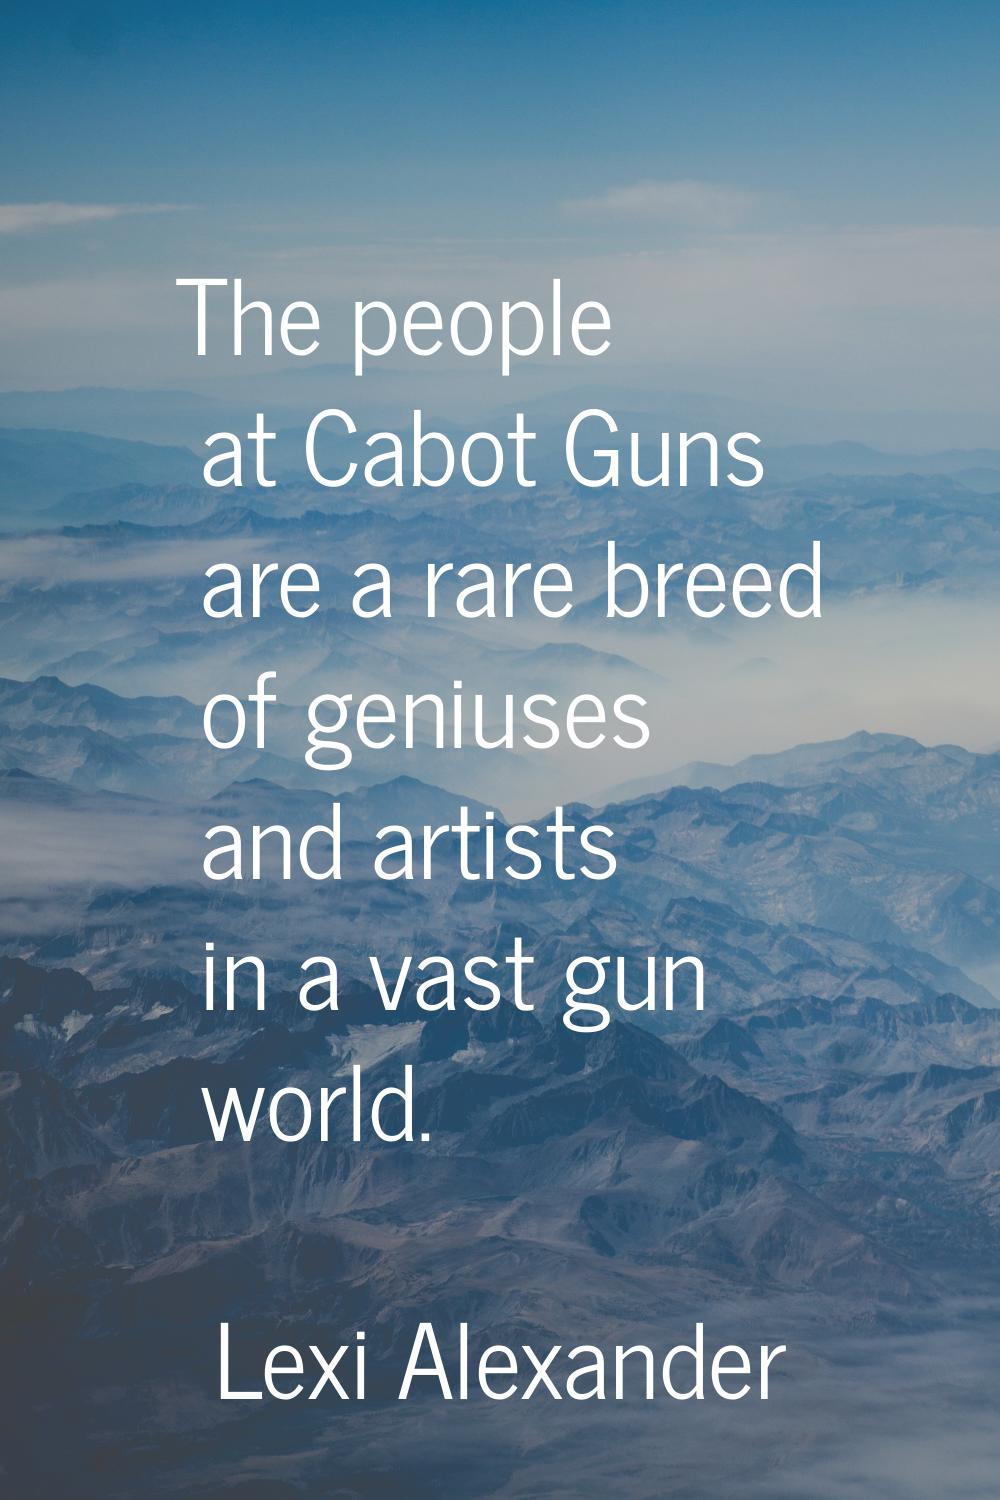 The people at Cabot Guns are a rare breed of geniuses and artists in a vast gun world.